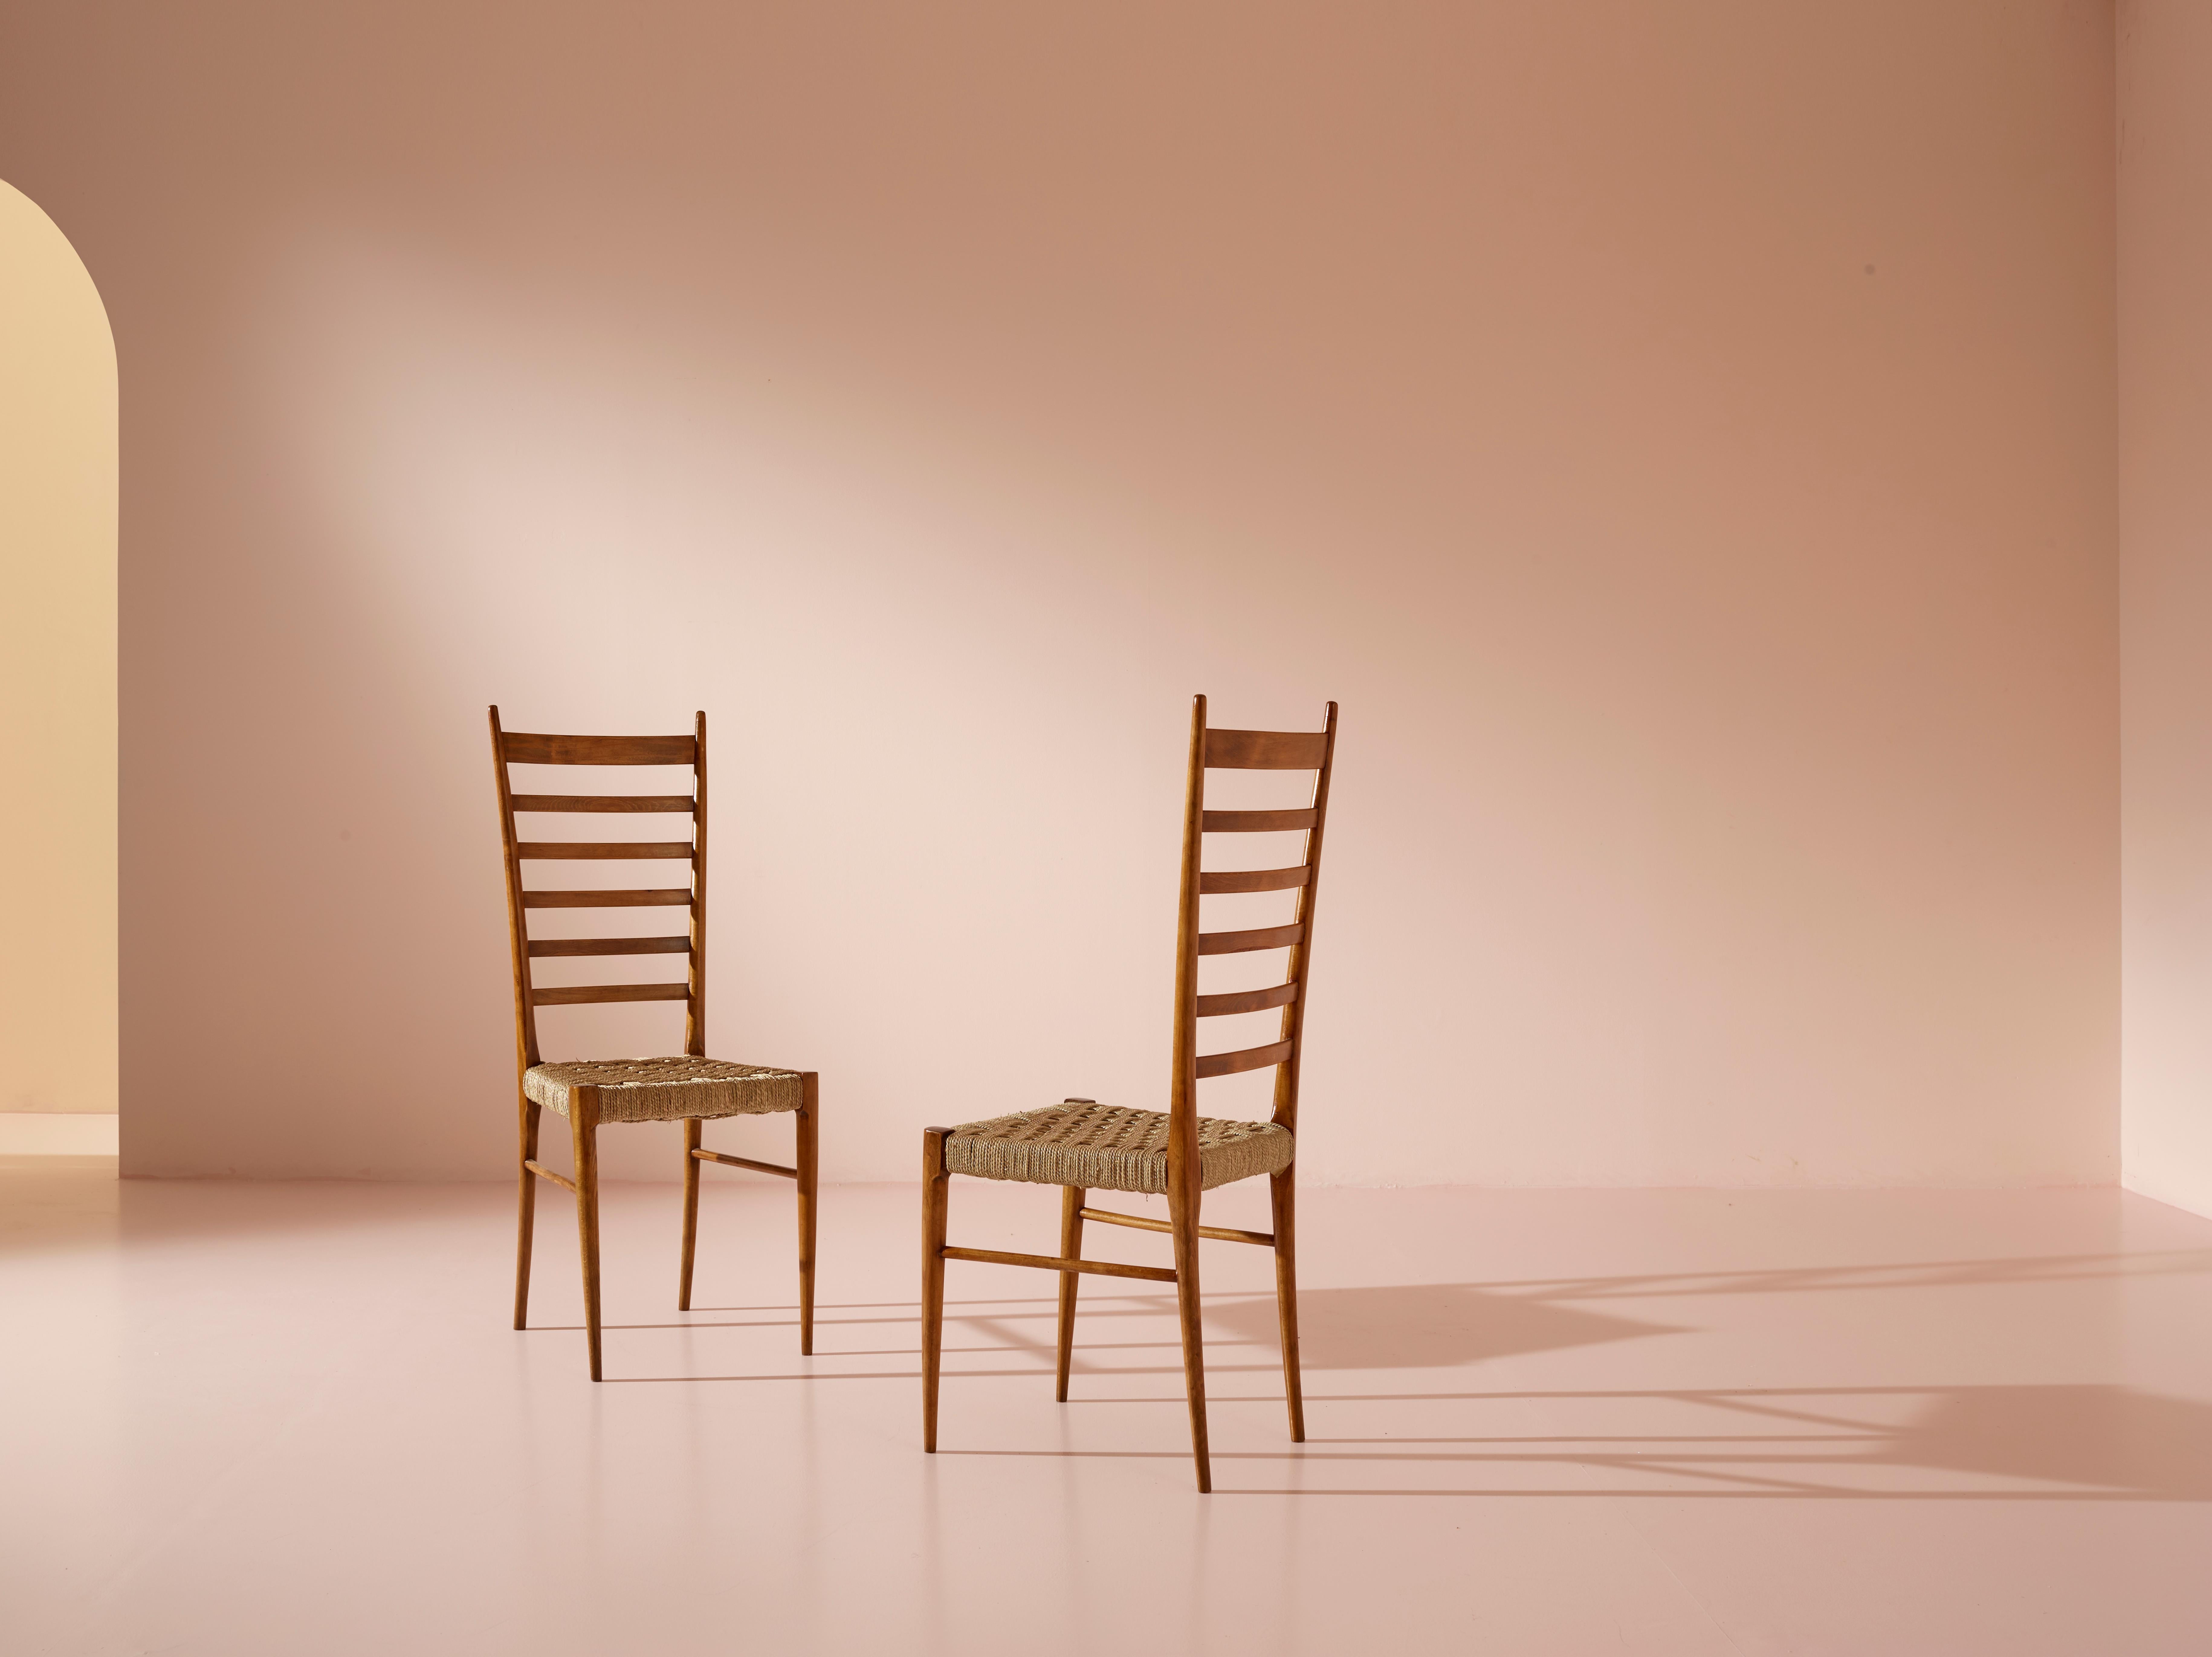 Colombo Sanguineti set of two ''Sei Stecche'' chairs, Chiavari, Italy, 1950s For Sale 3